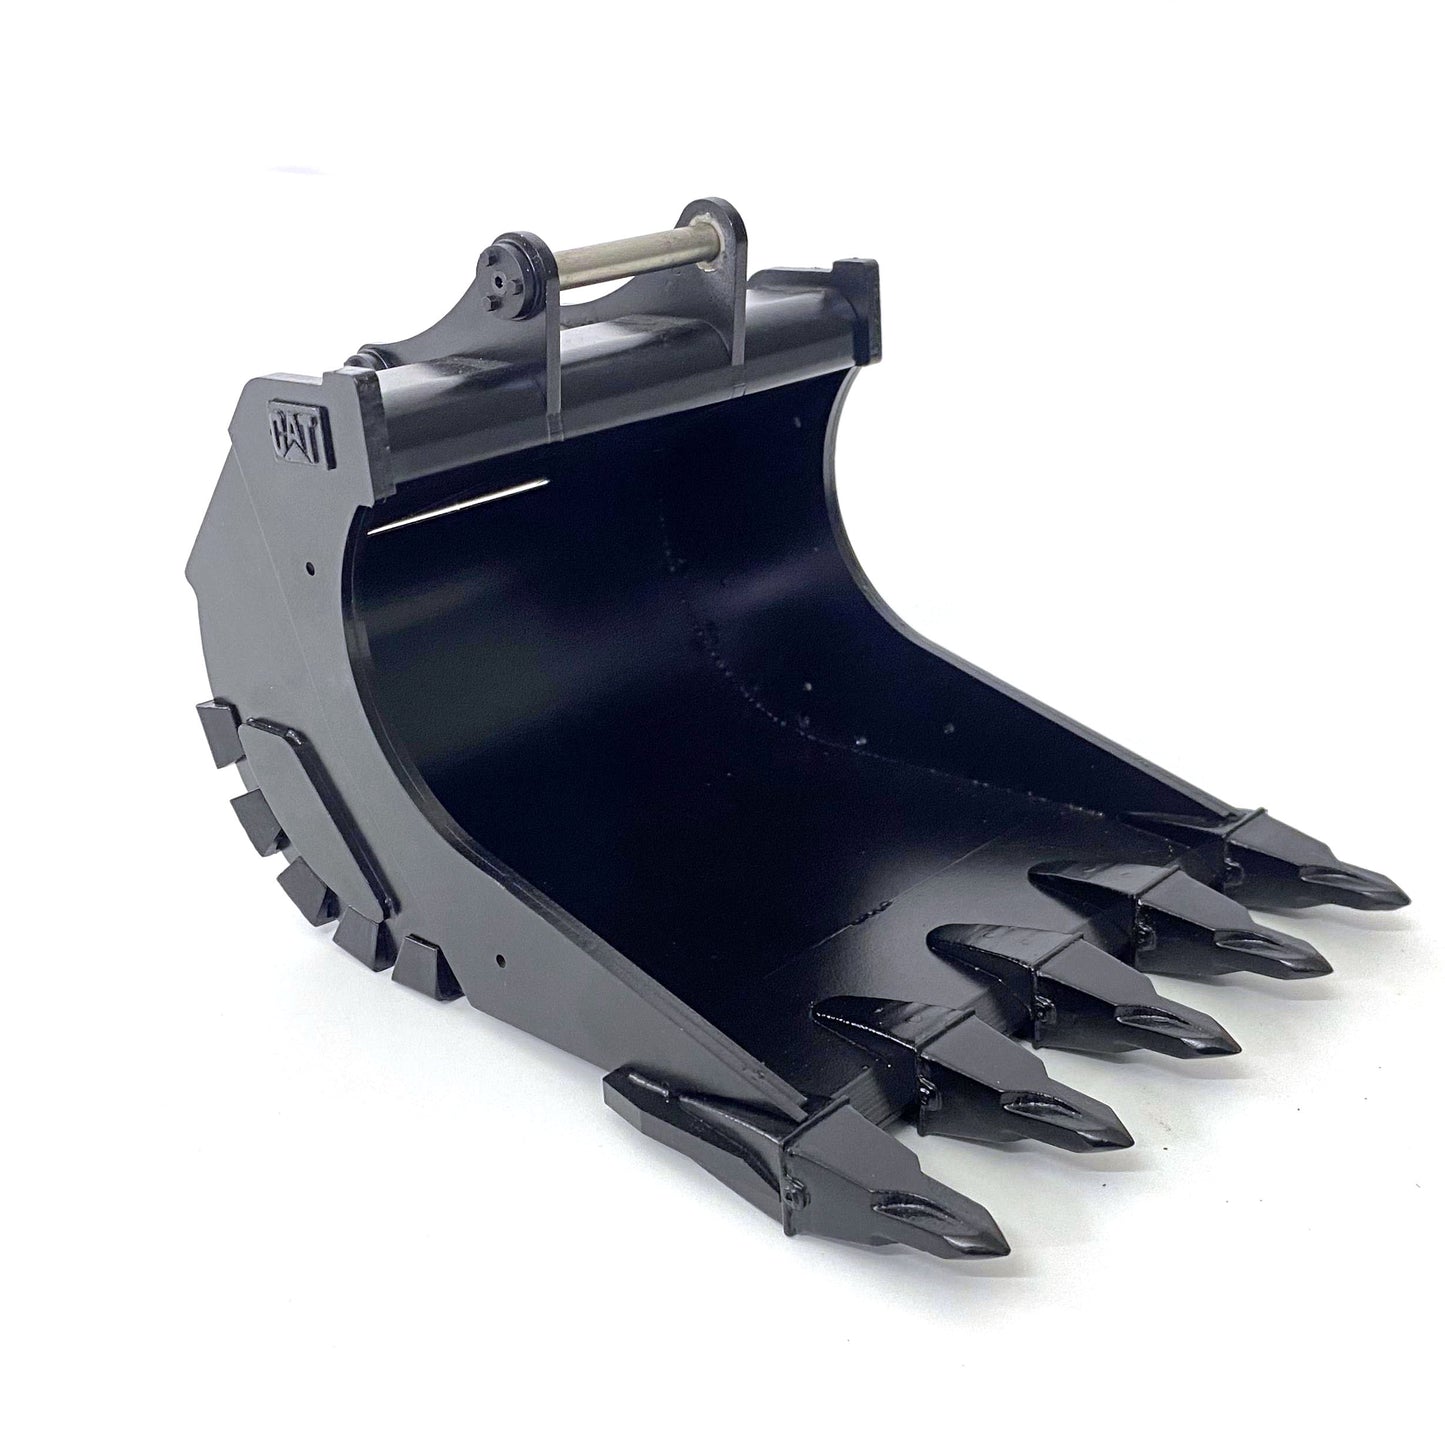 IN STOCK Metal Shovel Model Parts Vehicle Mining Bucket Claw Ripper Clamp for BMG 1/14 374F UHD Hydraulic RC Excavator Accessories